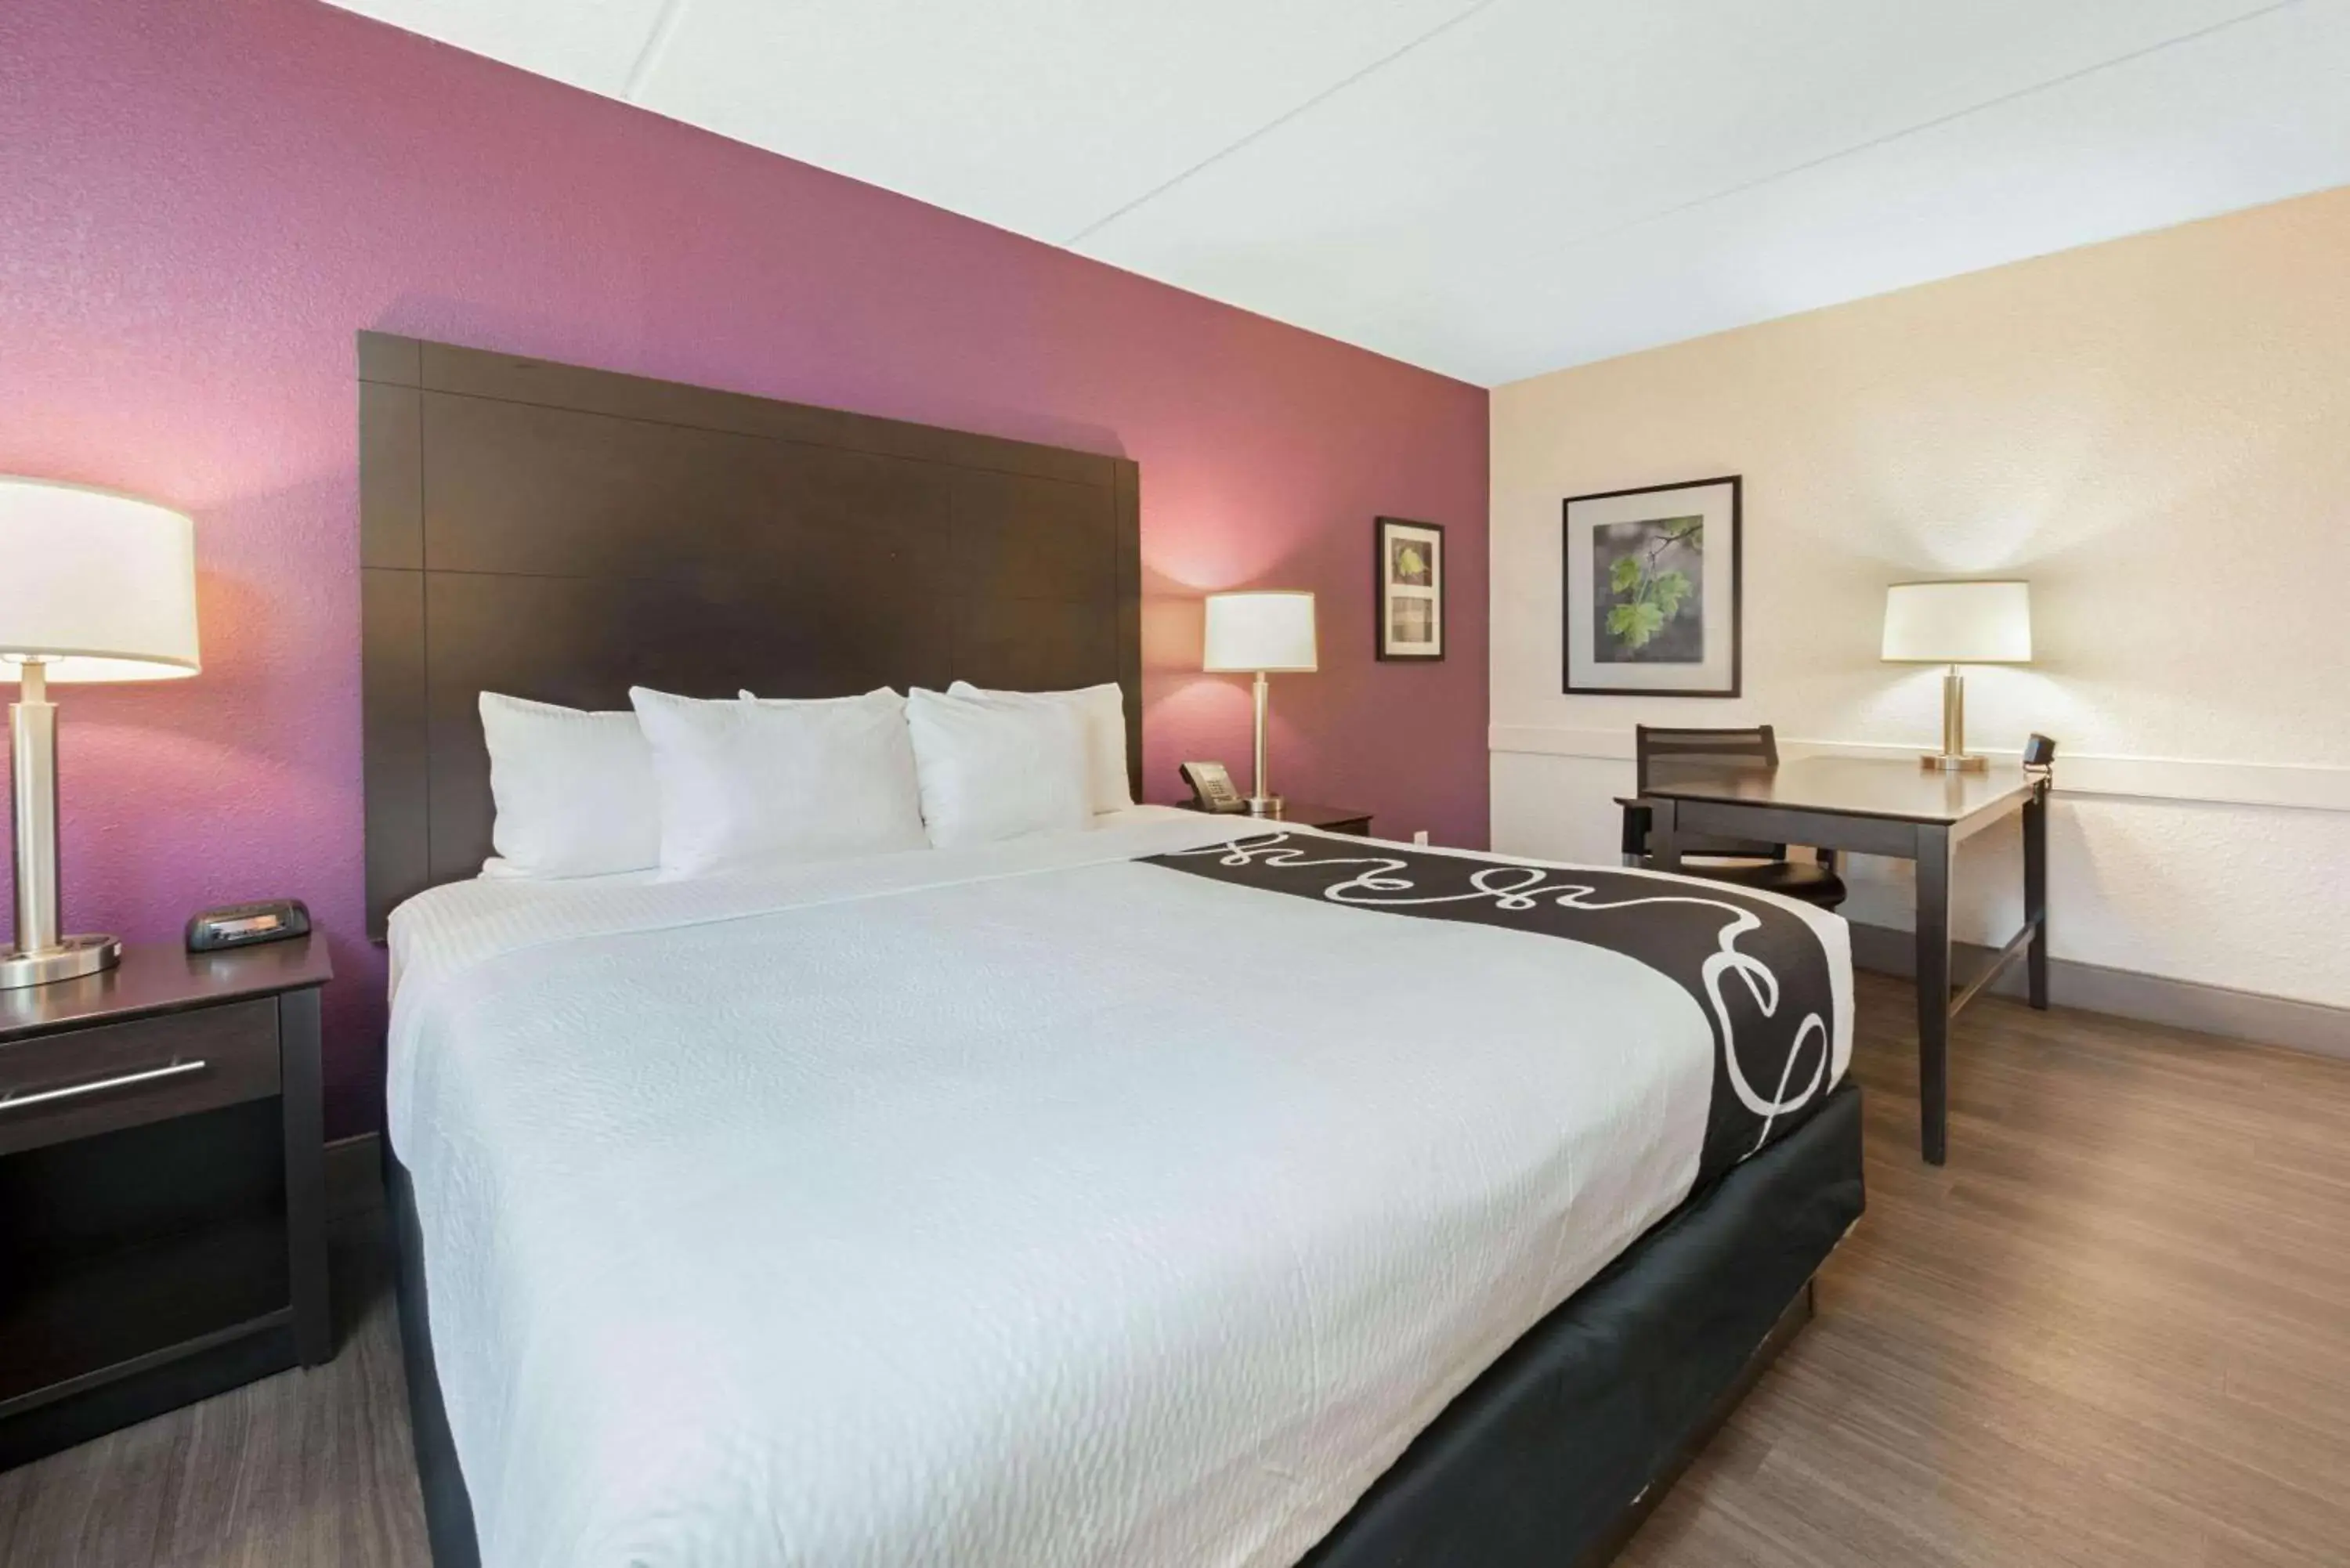 Deluxe King Room in La Quinta Inn by Wyndham Miami Airport North